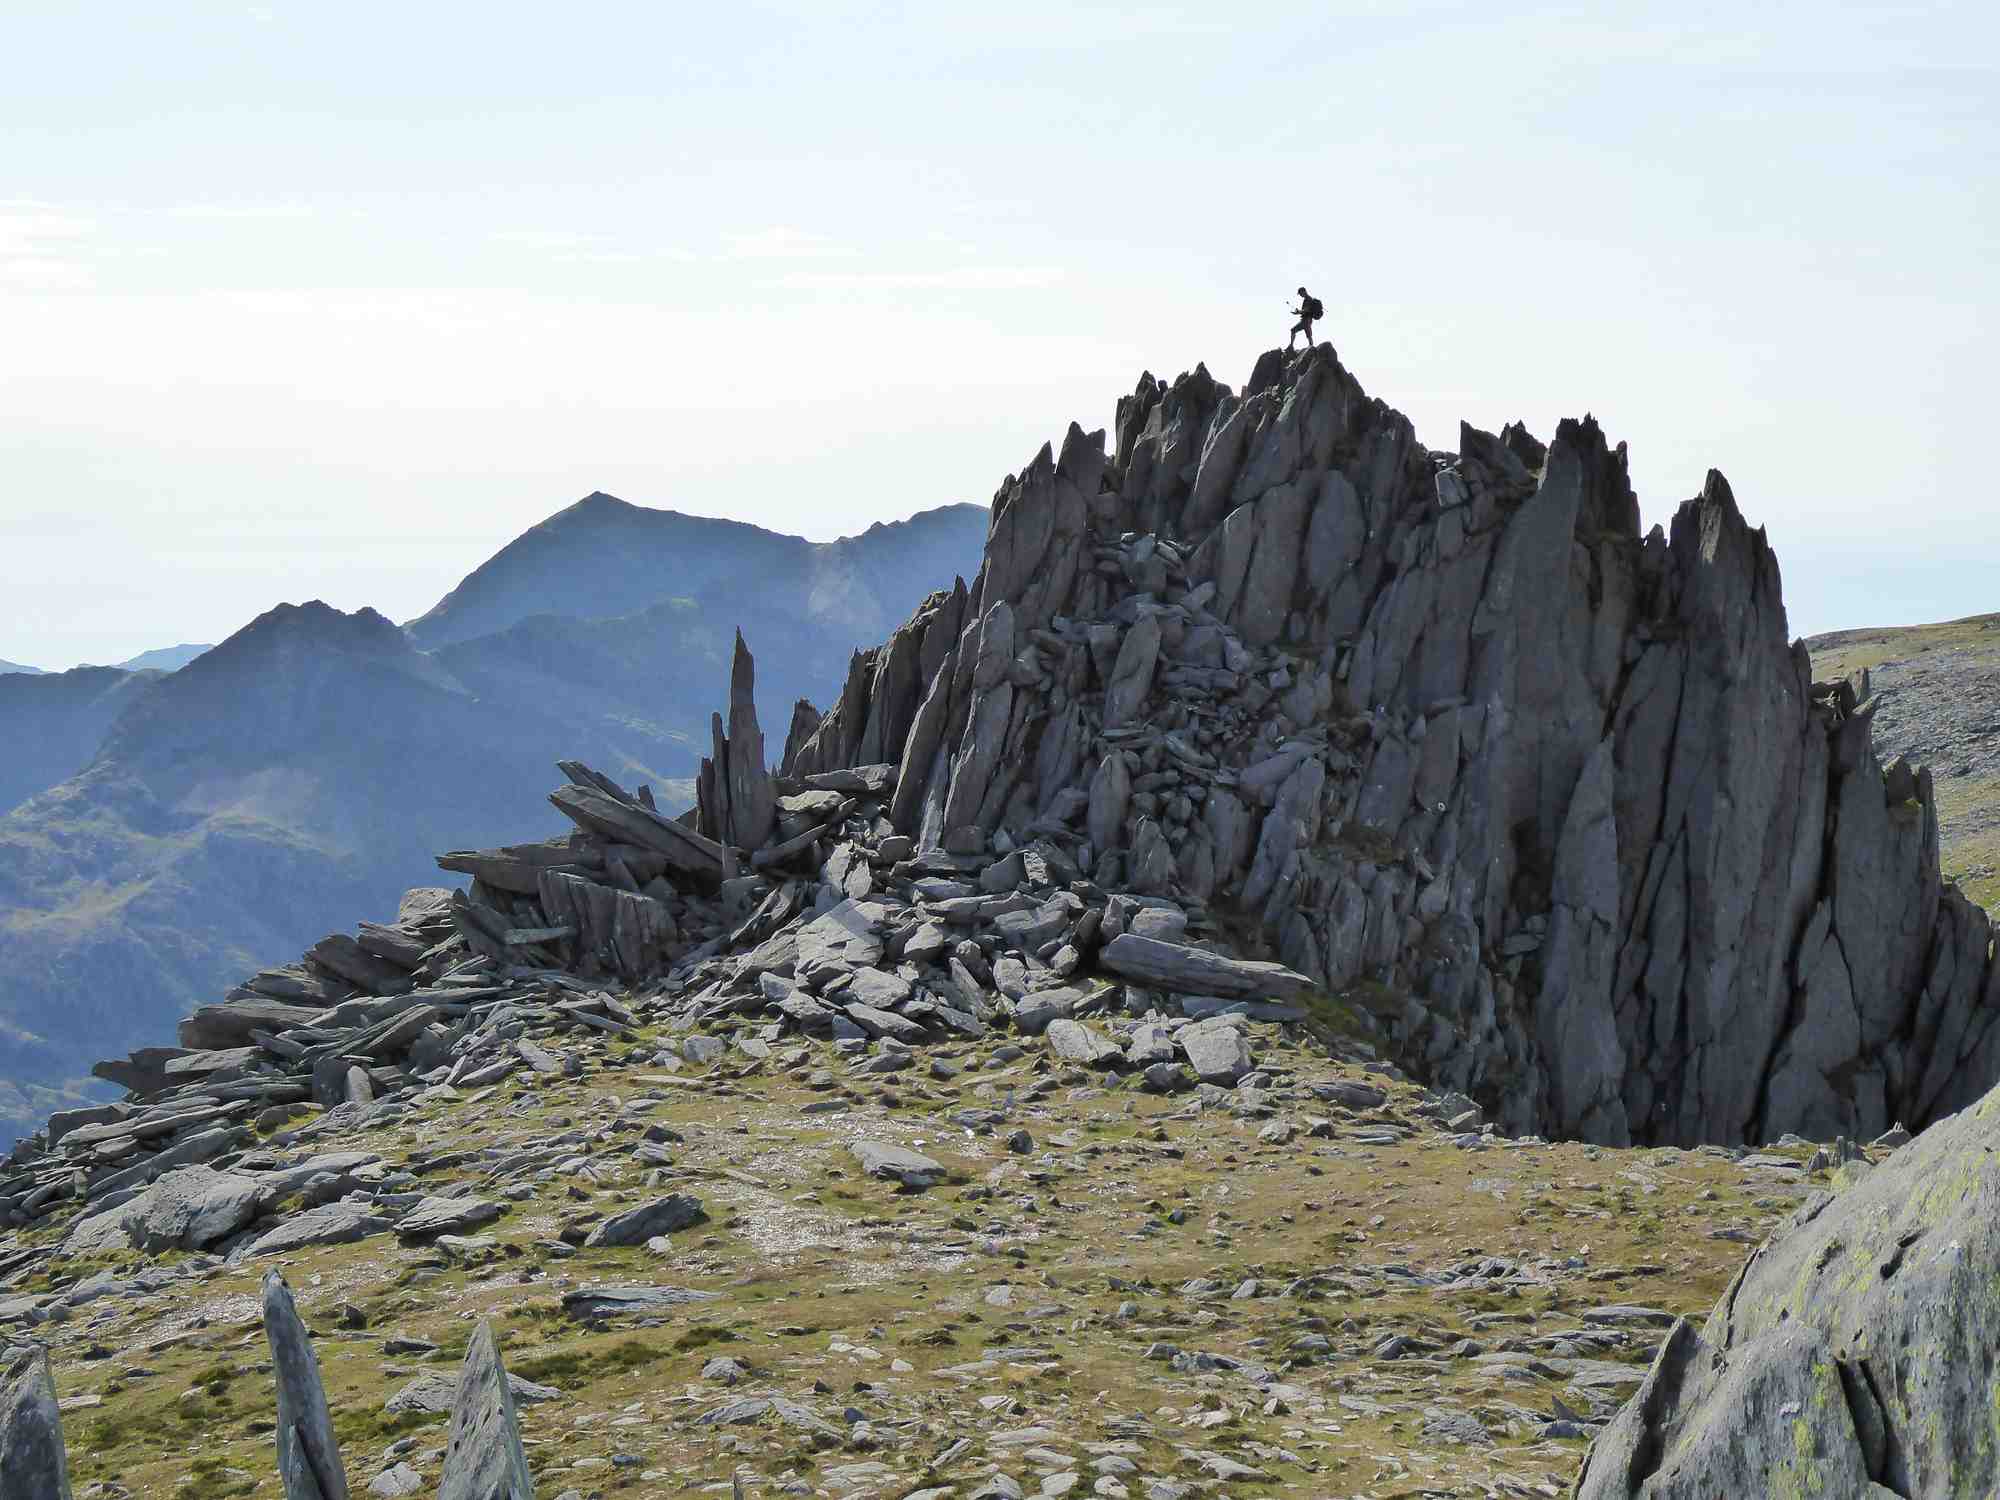 The Castle of the Wind - a fantastically jagged outcrop on the Glyderau. This is a classic hiking route in Snowdonia.